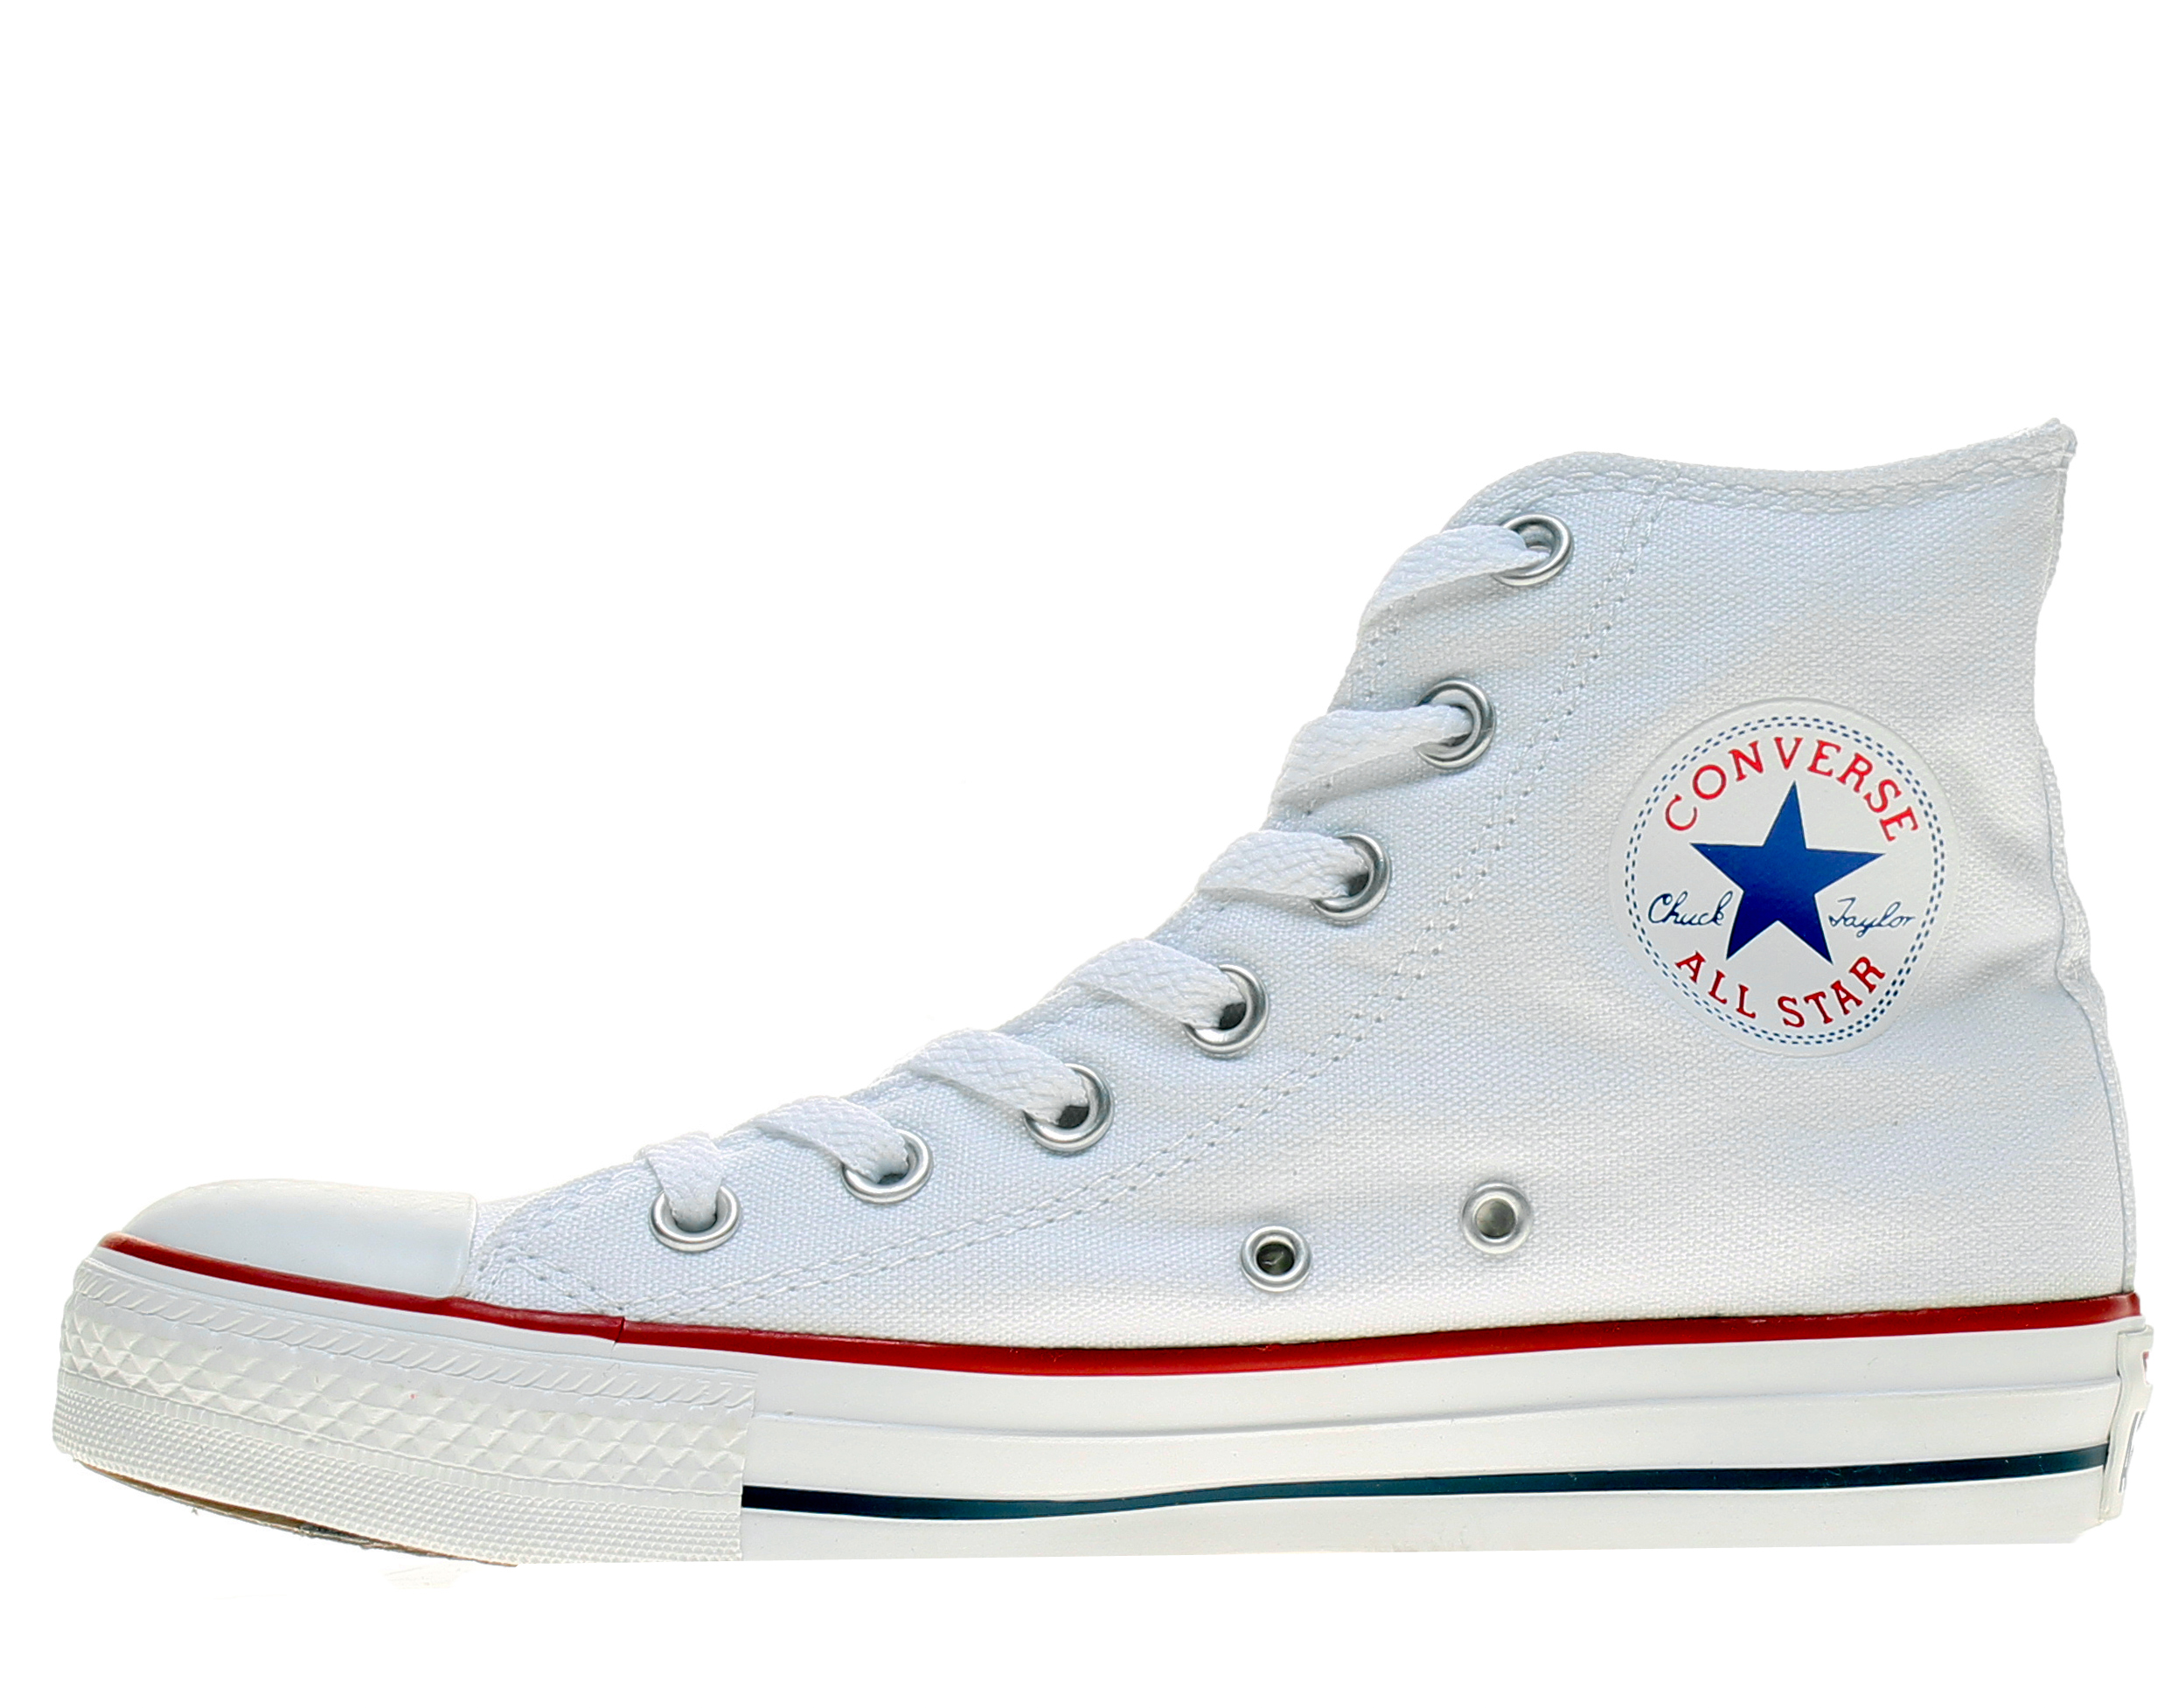 Converse Chuck Taylor All Star Hi Sneakers White - image 3 of 6